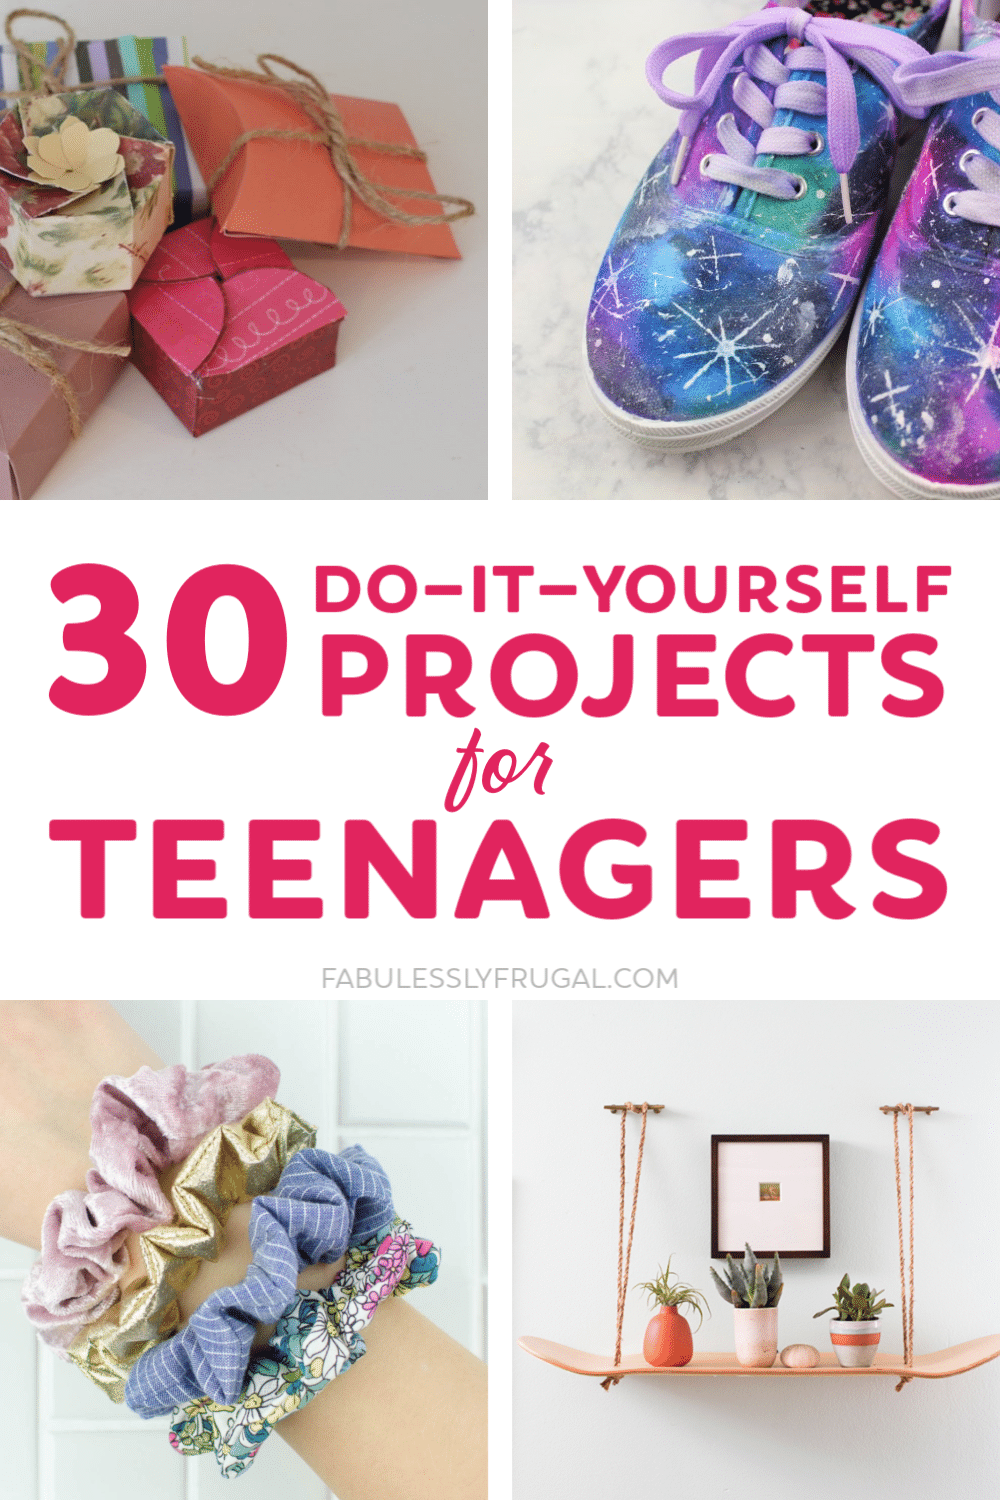 30 Fun Crafts for Teens that Will Bring Out Their Inner Artist